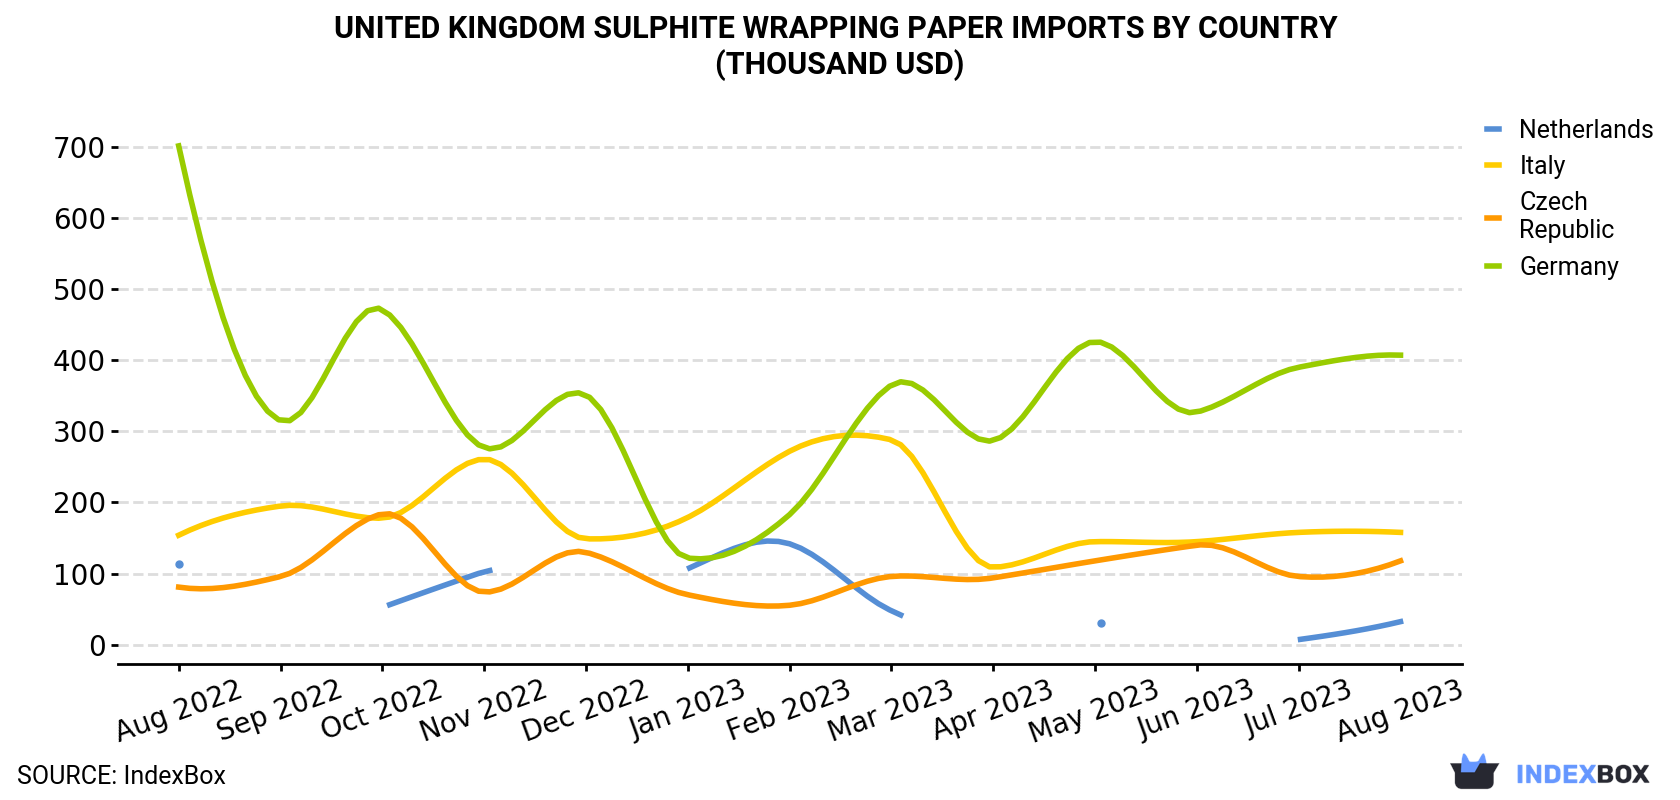 United Kingdom Sulphite Wrapping Paper Imports By Country (Thousand USD)